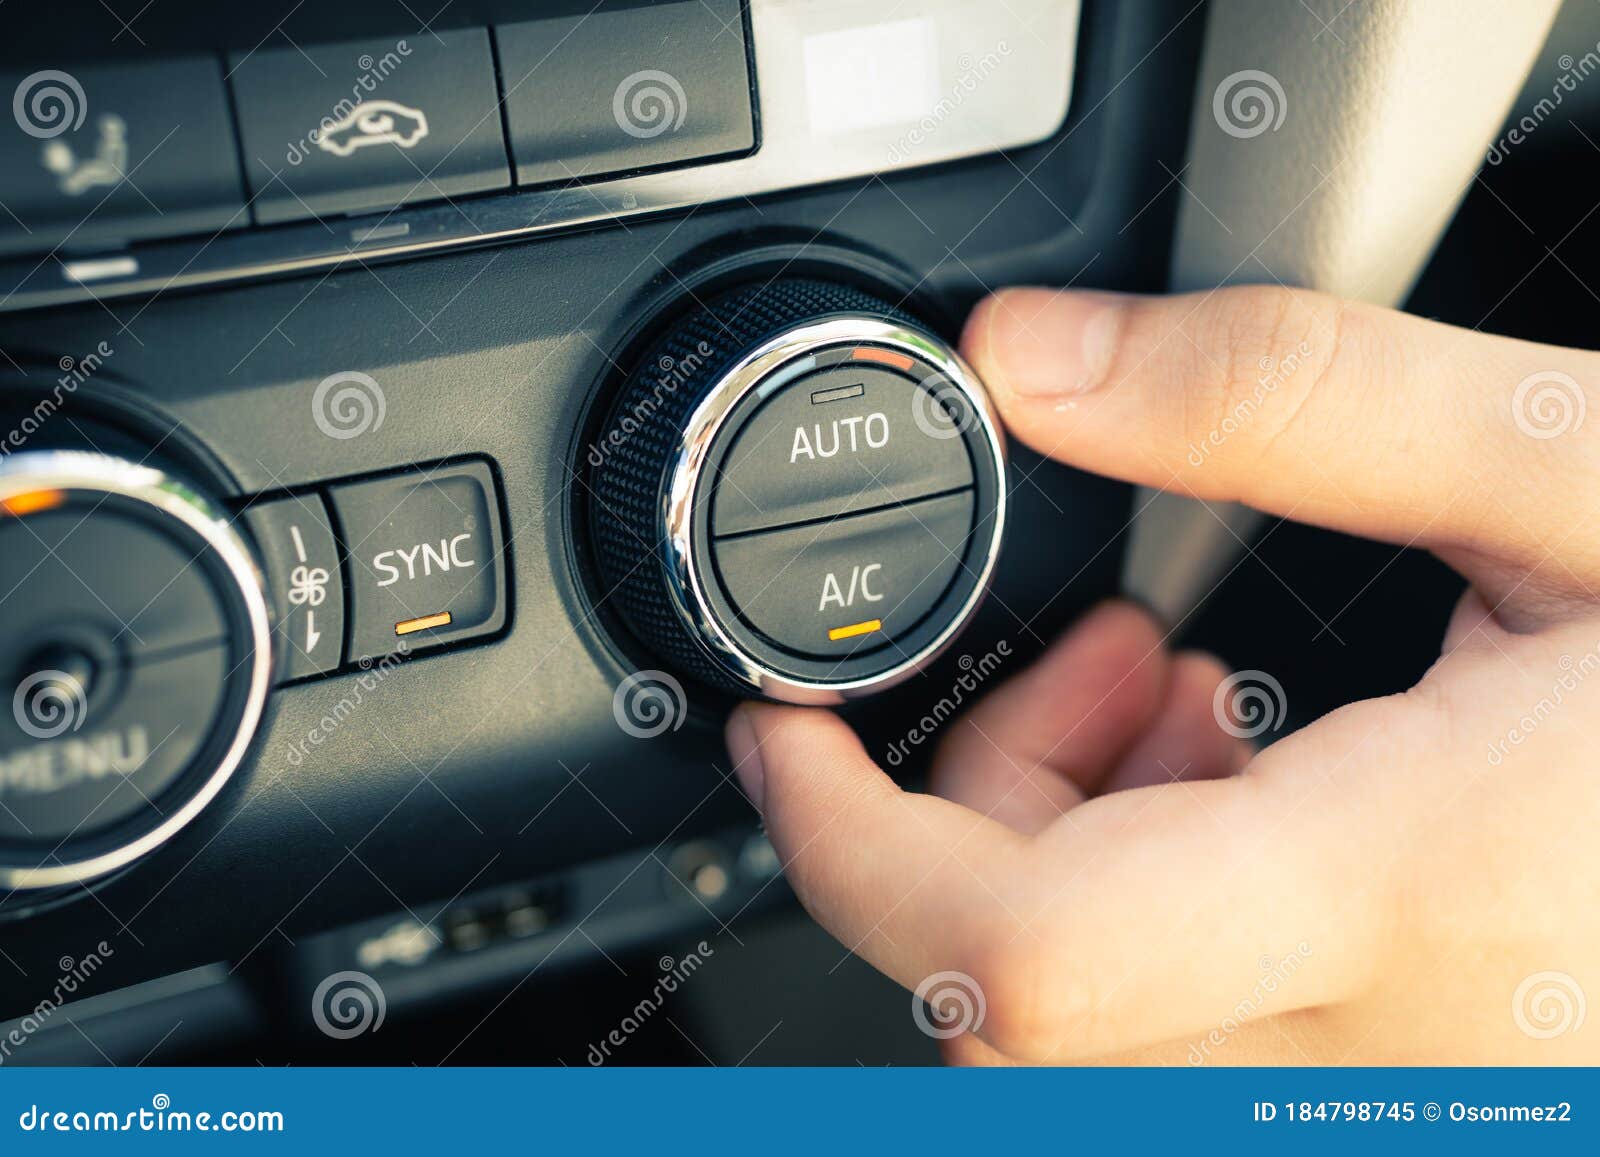 Car Air Conditioner On Off Button Close Up View Stock Image Image Of Driver Adjusting 184798745